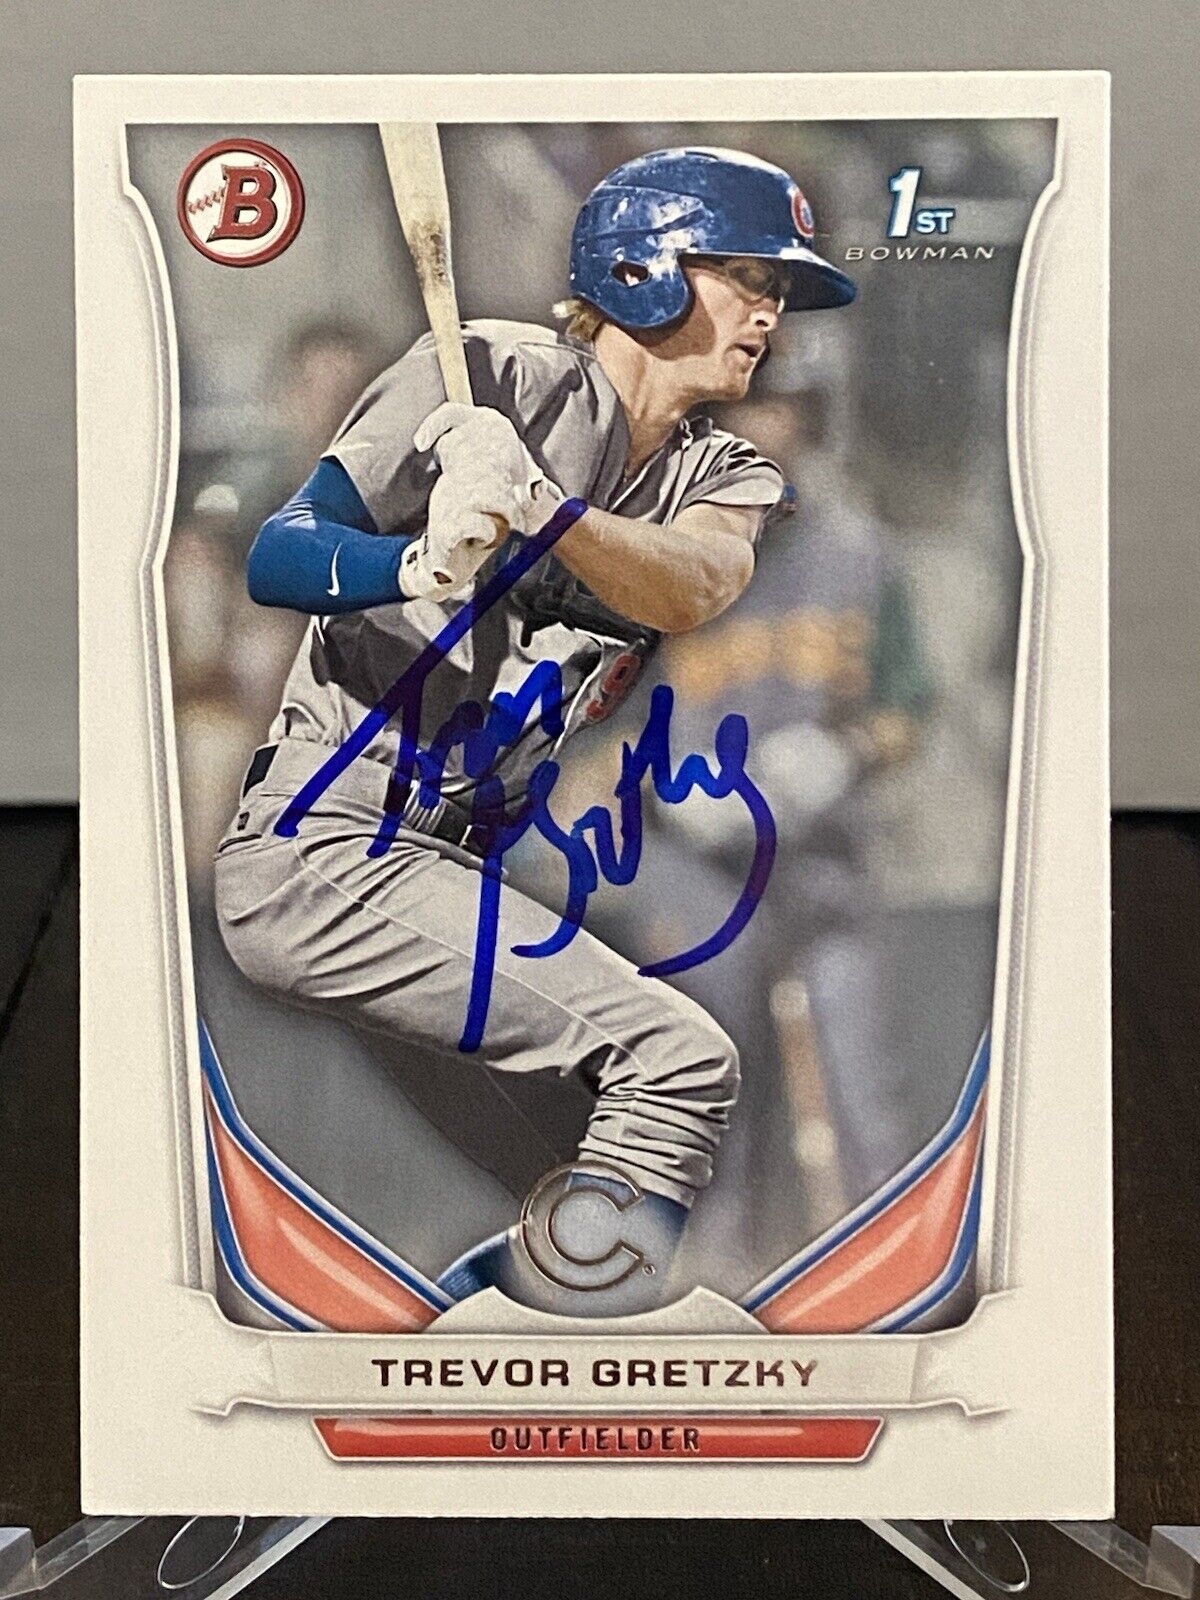 2014 BOWMAN PROSPECTS 1ST EDITION TREVOR GRETZKY IP SIGNED CARD CUBS